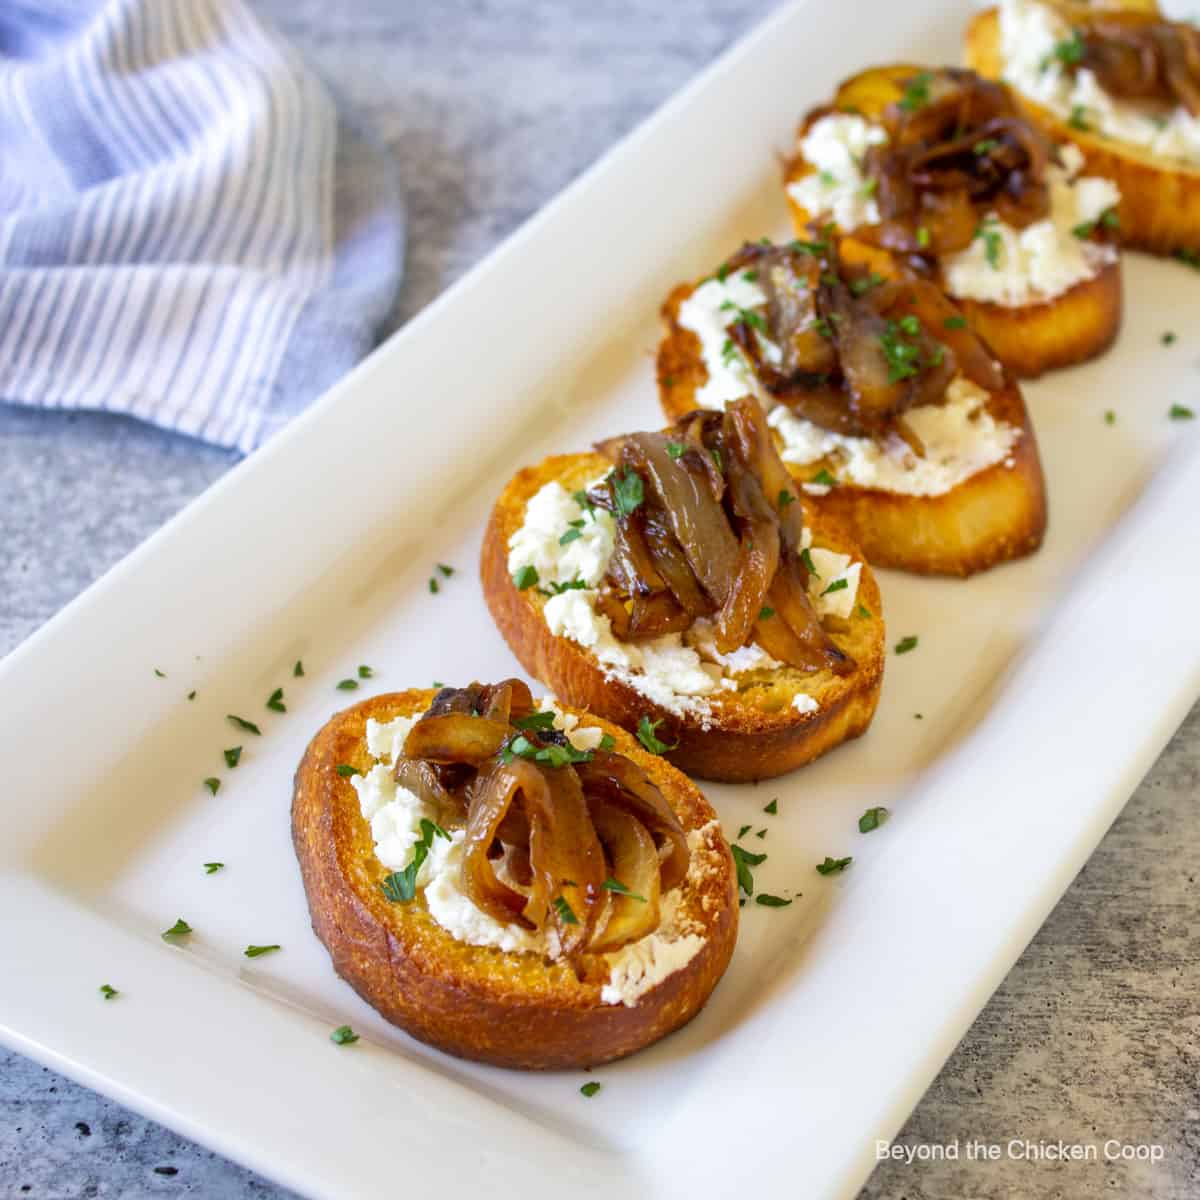 Toasted bread topped with a white spreadable cheese and caramelized onions.